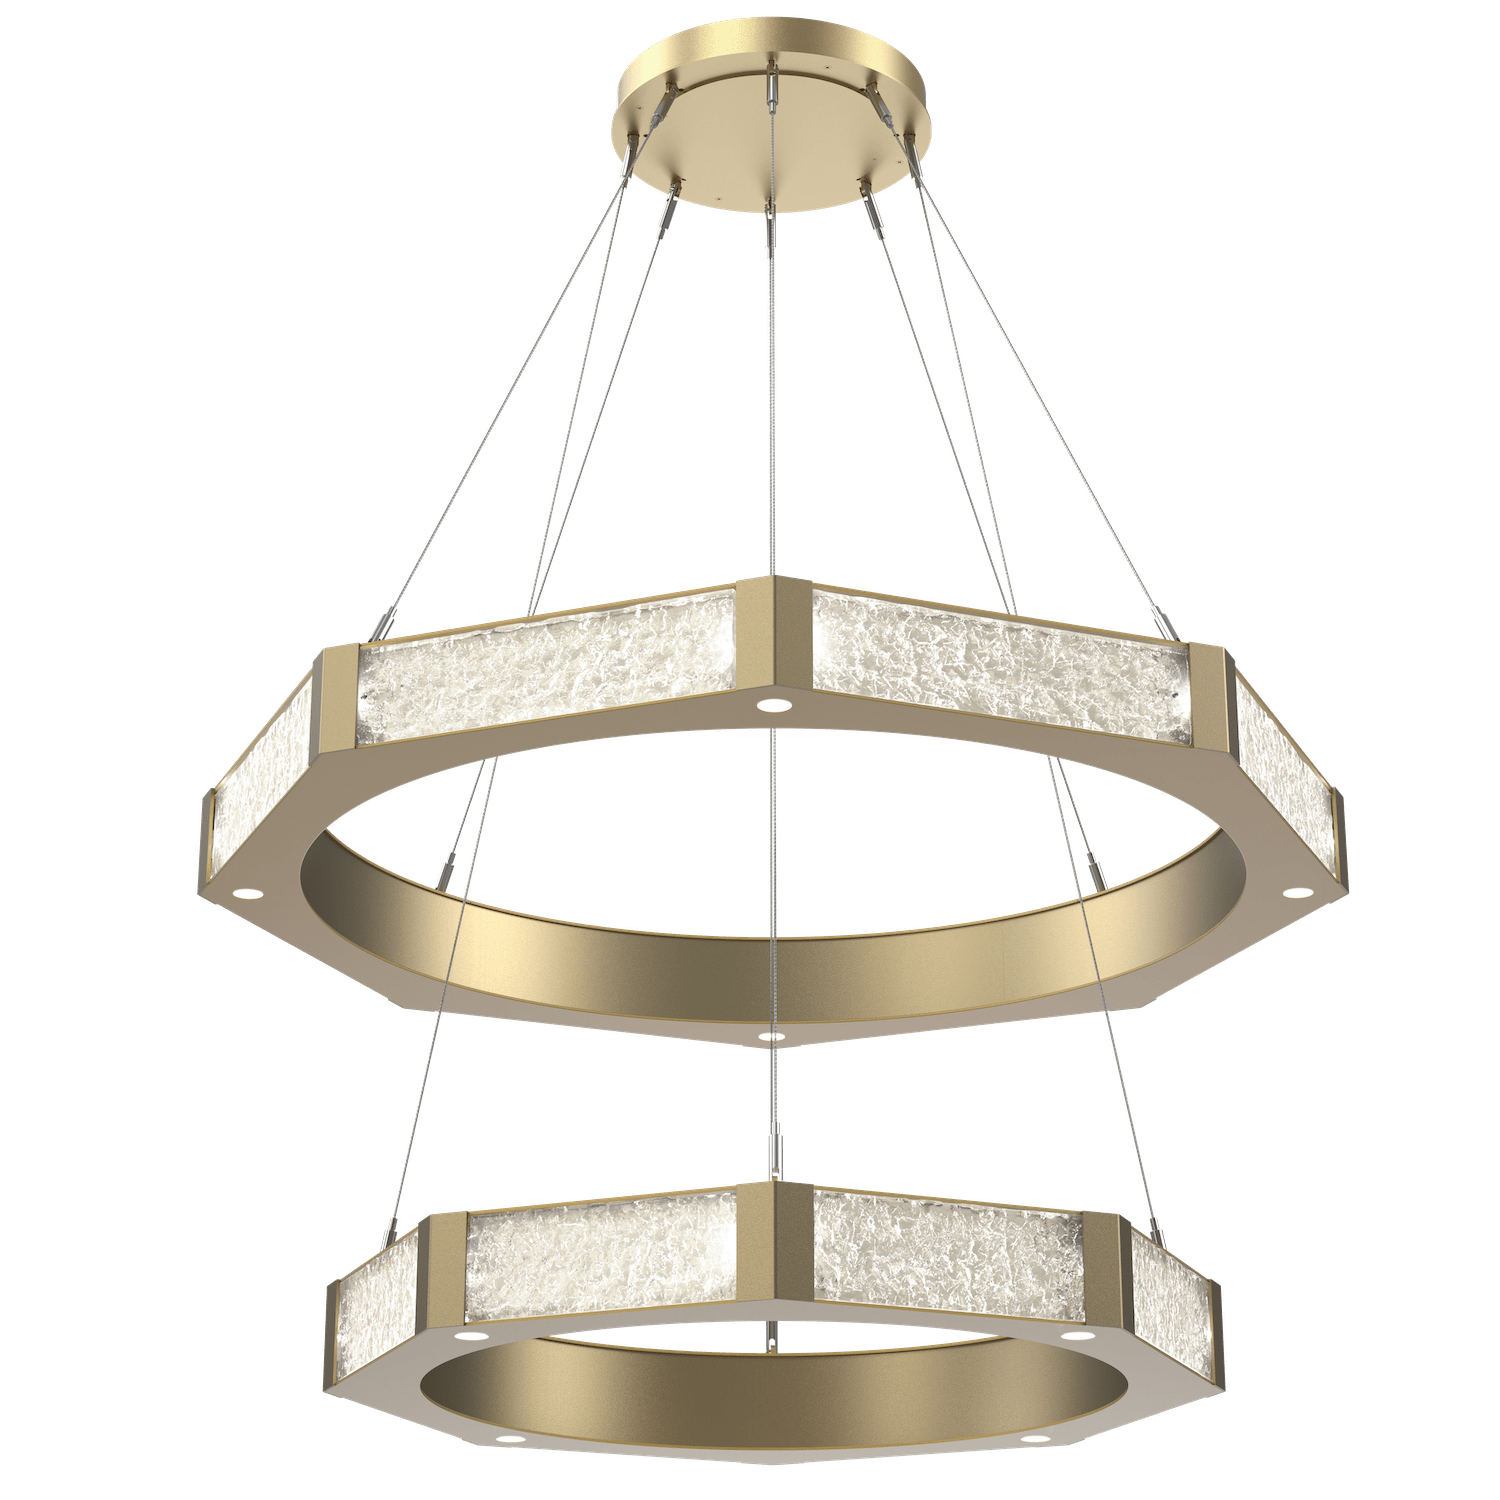 CHB0061-2B-GB-GC-Hammerton-Studio-Glacier-48-inch-two-tier-ring-chandelier-with-gilded-brass-finish-and-clear-blown-glass-with-geo-clear-cast-glass-diffusers-and-LED-lamping